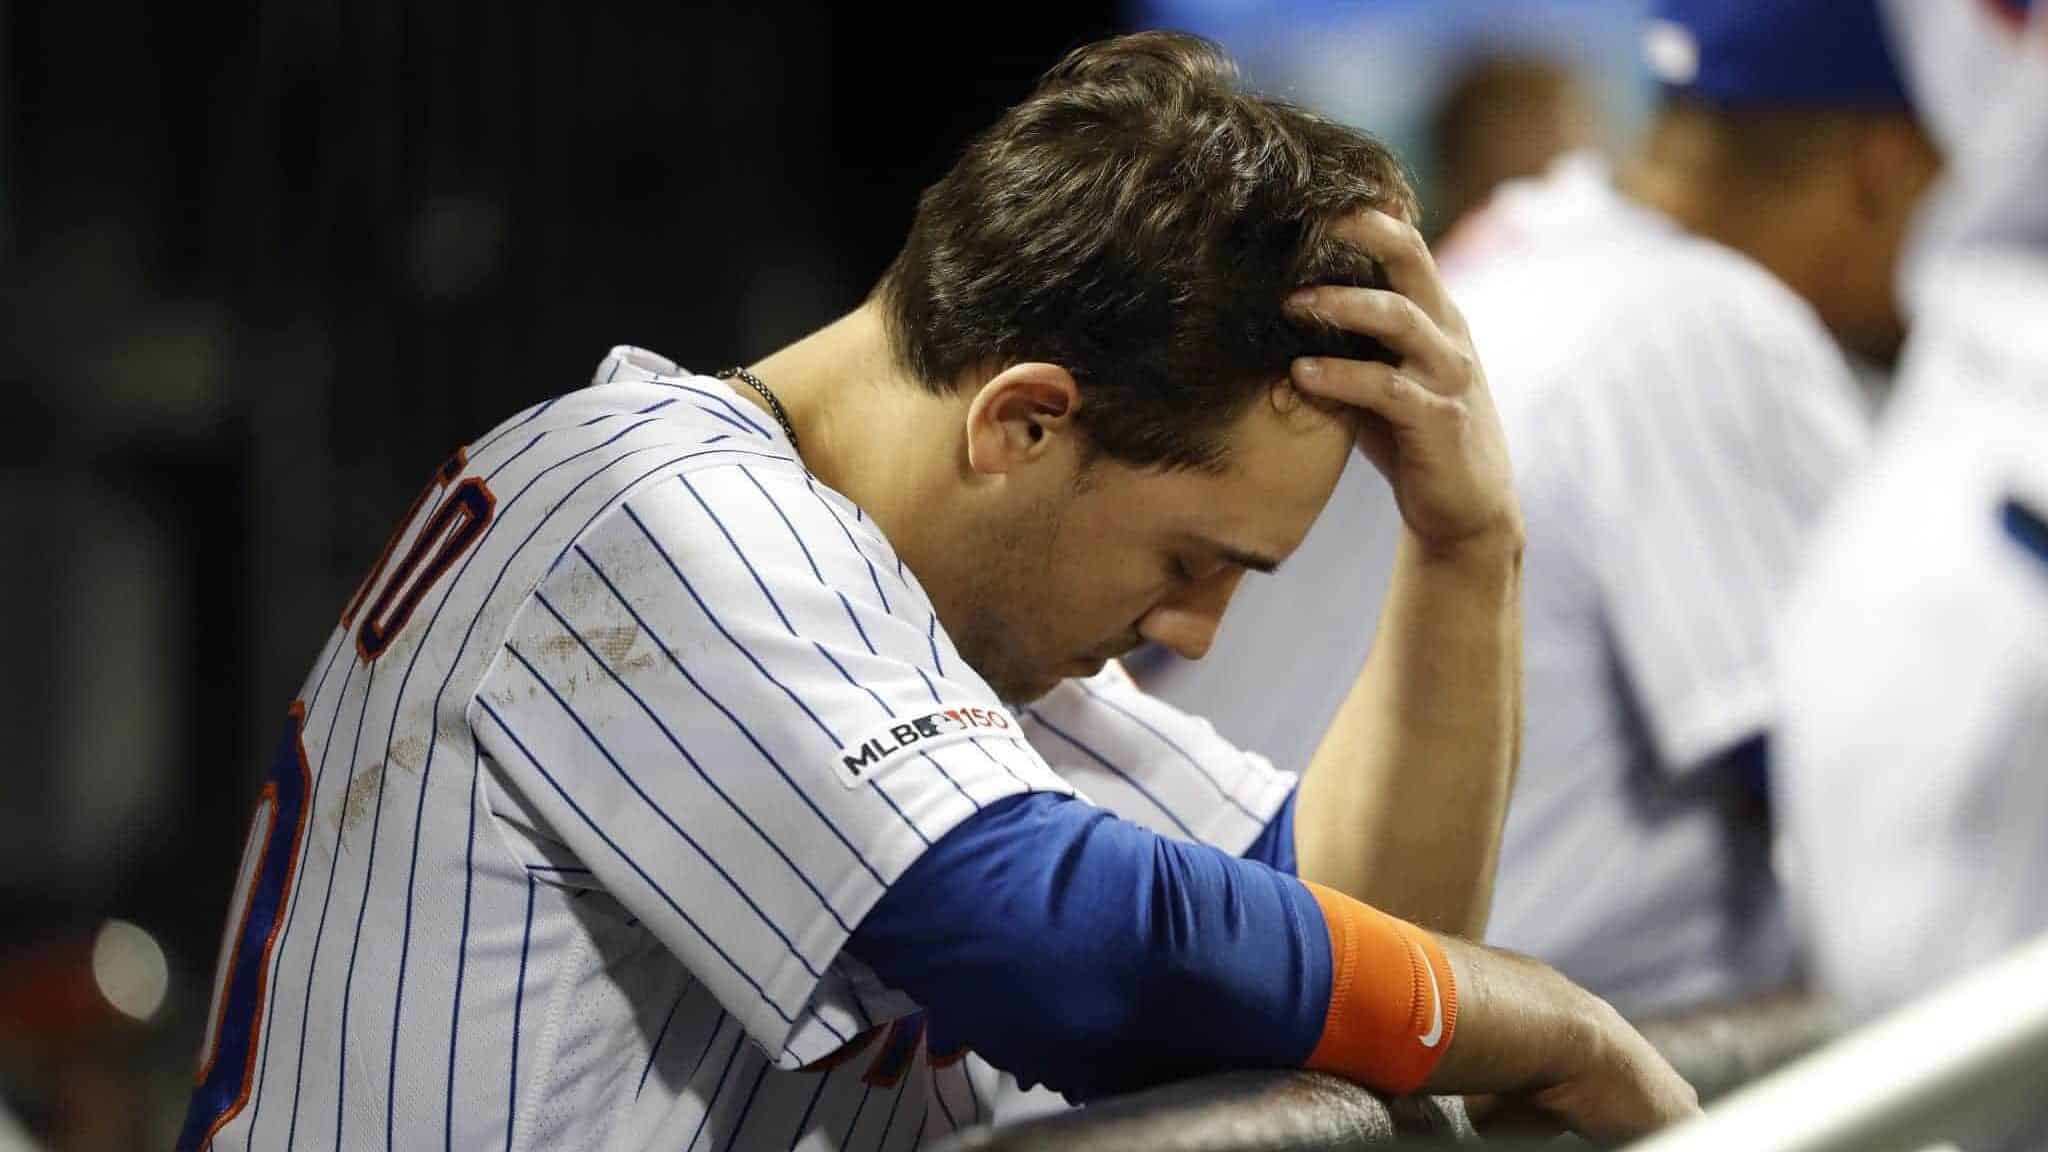 NEW YORK, NEW YORK - JUNE 04: Michael Conforto #30 of the New York Mets reacts in the dugout after striking out against the San Francisco Giants during the eighth inning at Citi Field on June 04, 2019 in New York City.